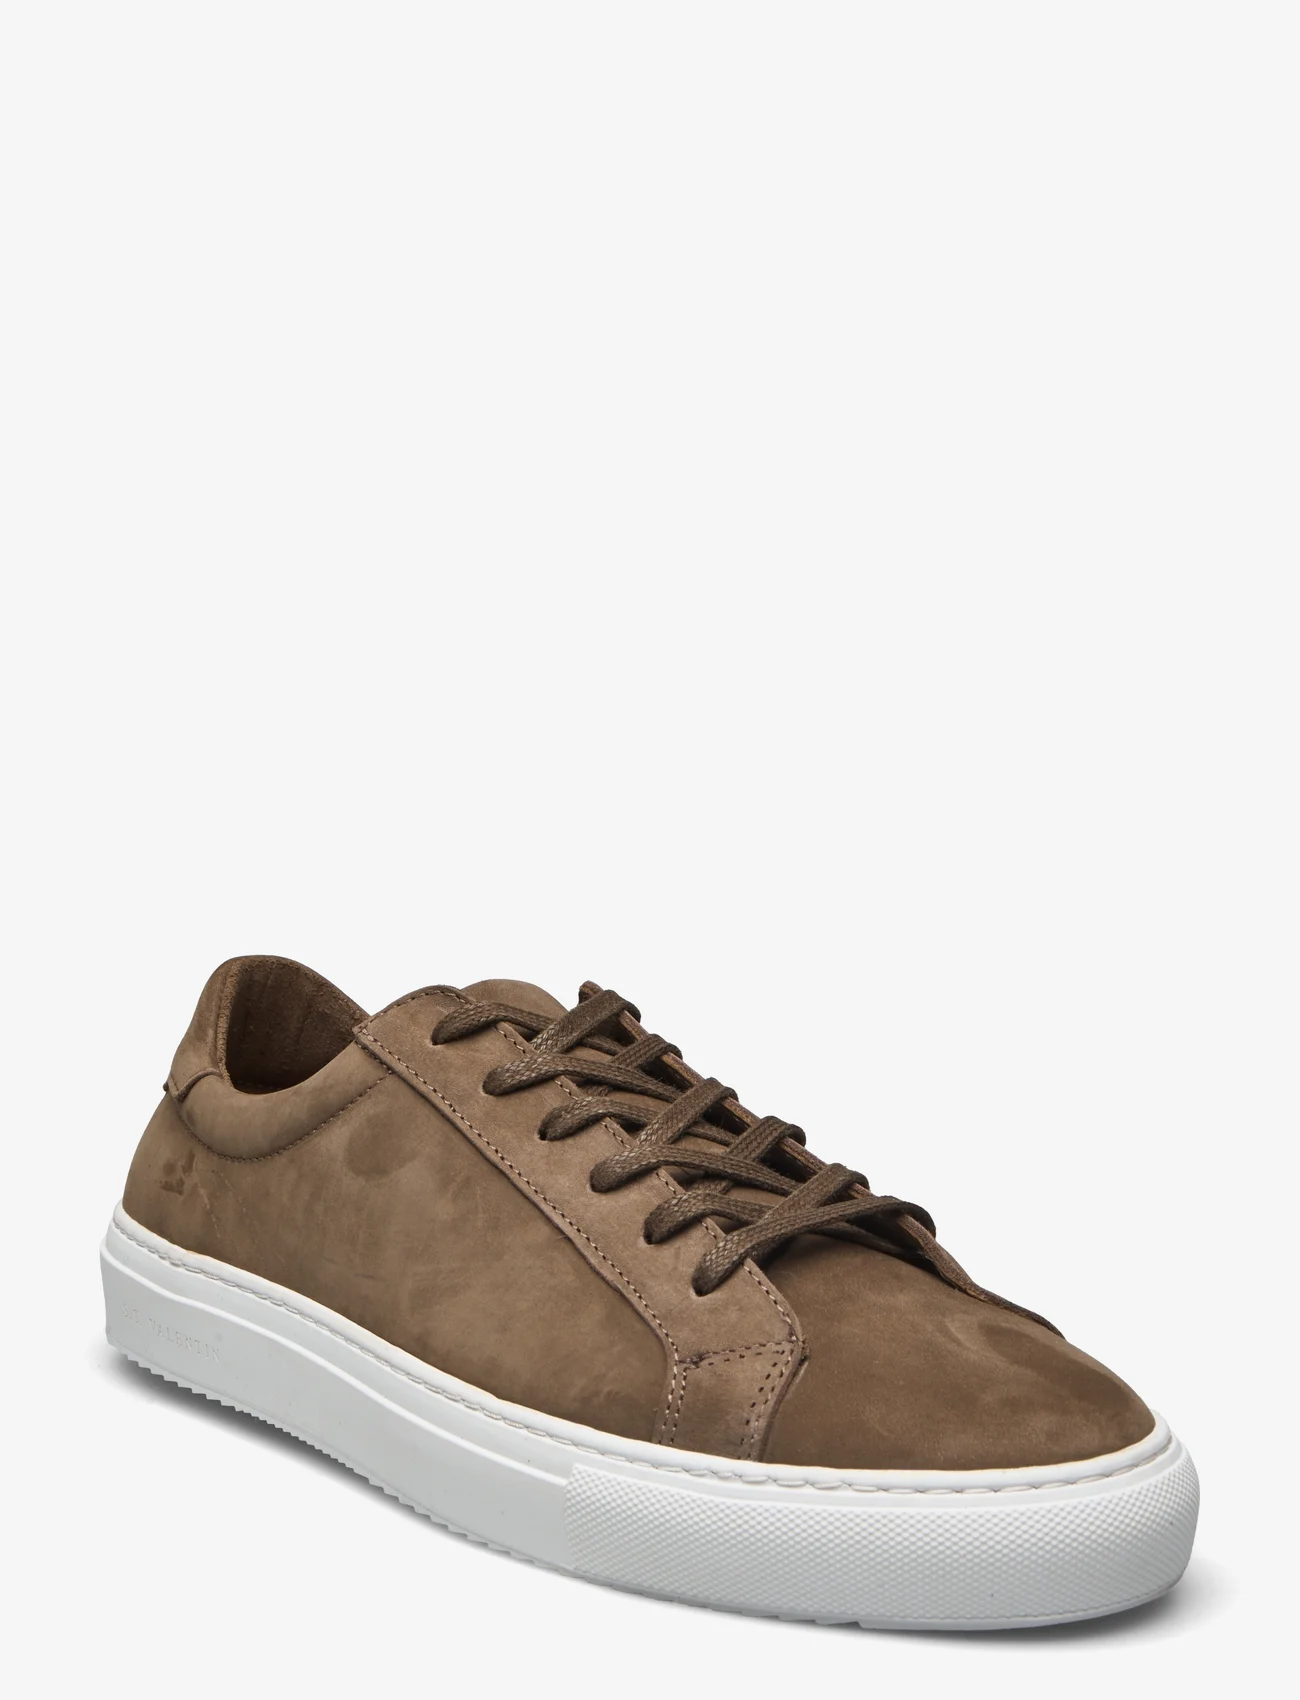 S.T. VALENTIN - Classic Sneaker -Grained leather - low tops - taupe - 0